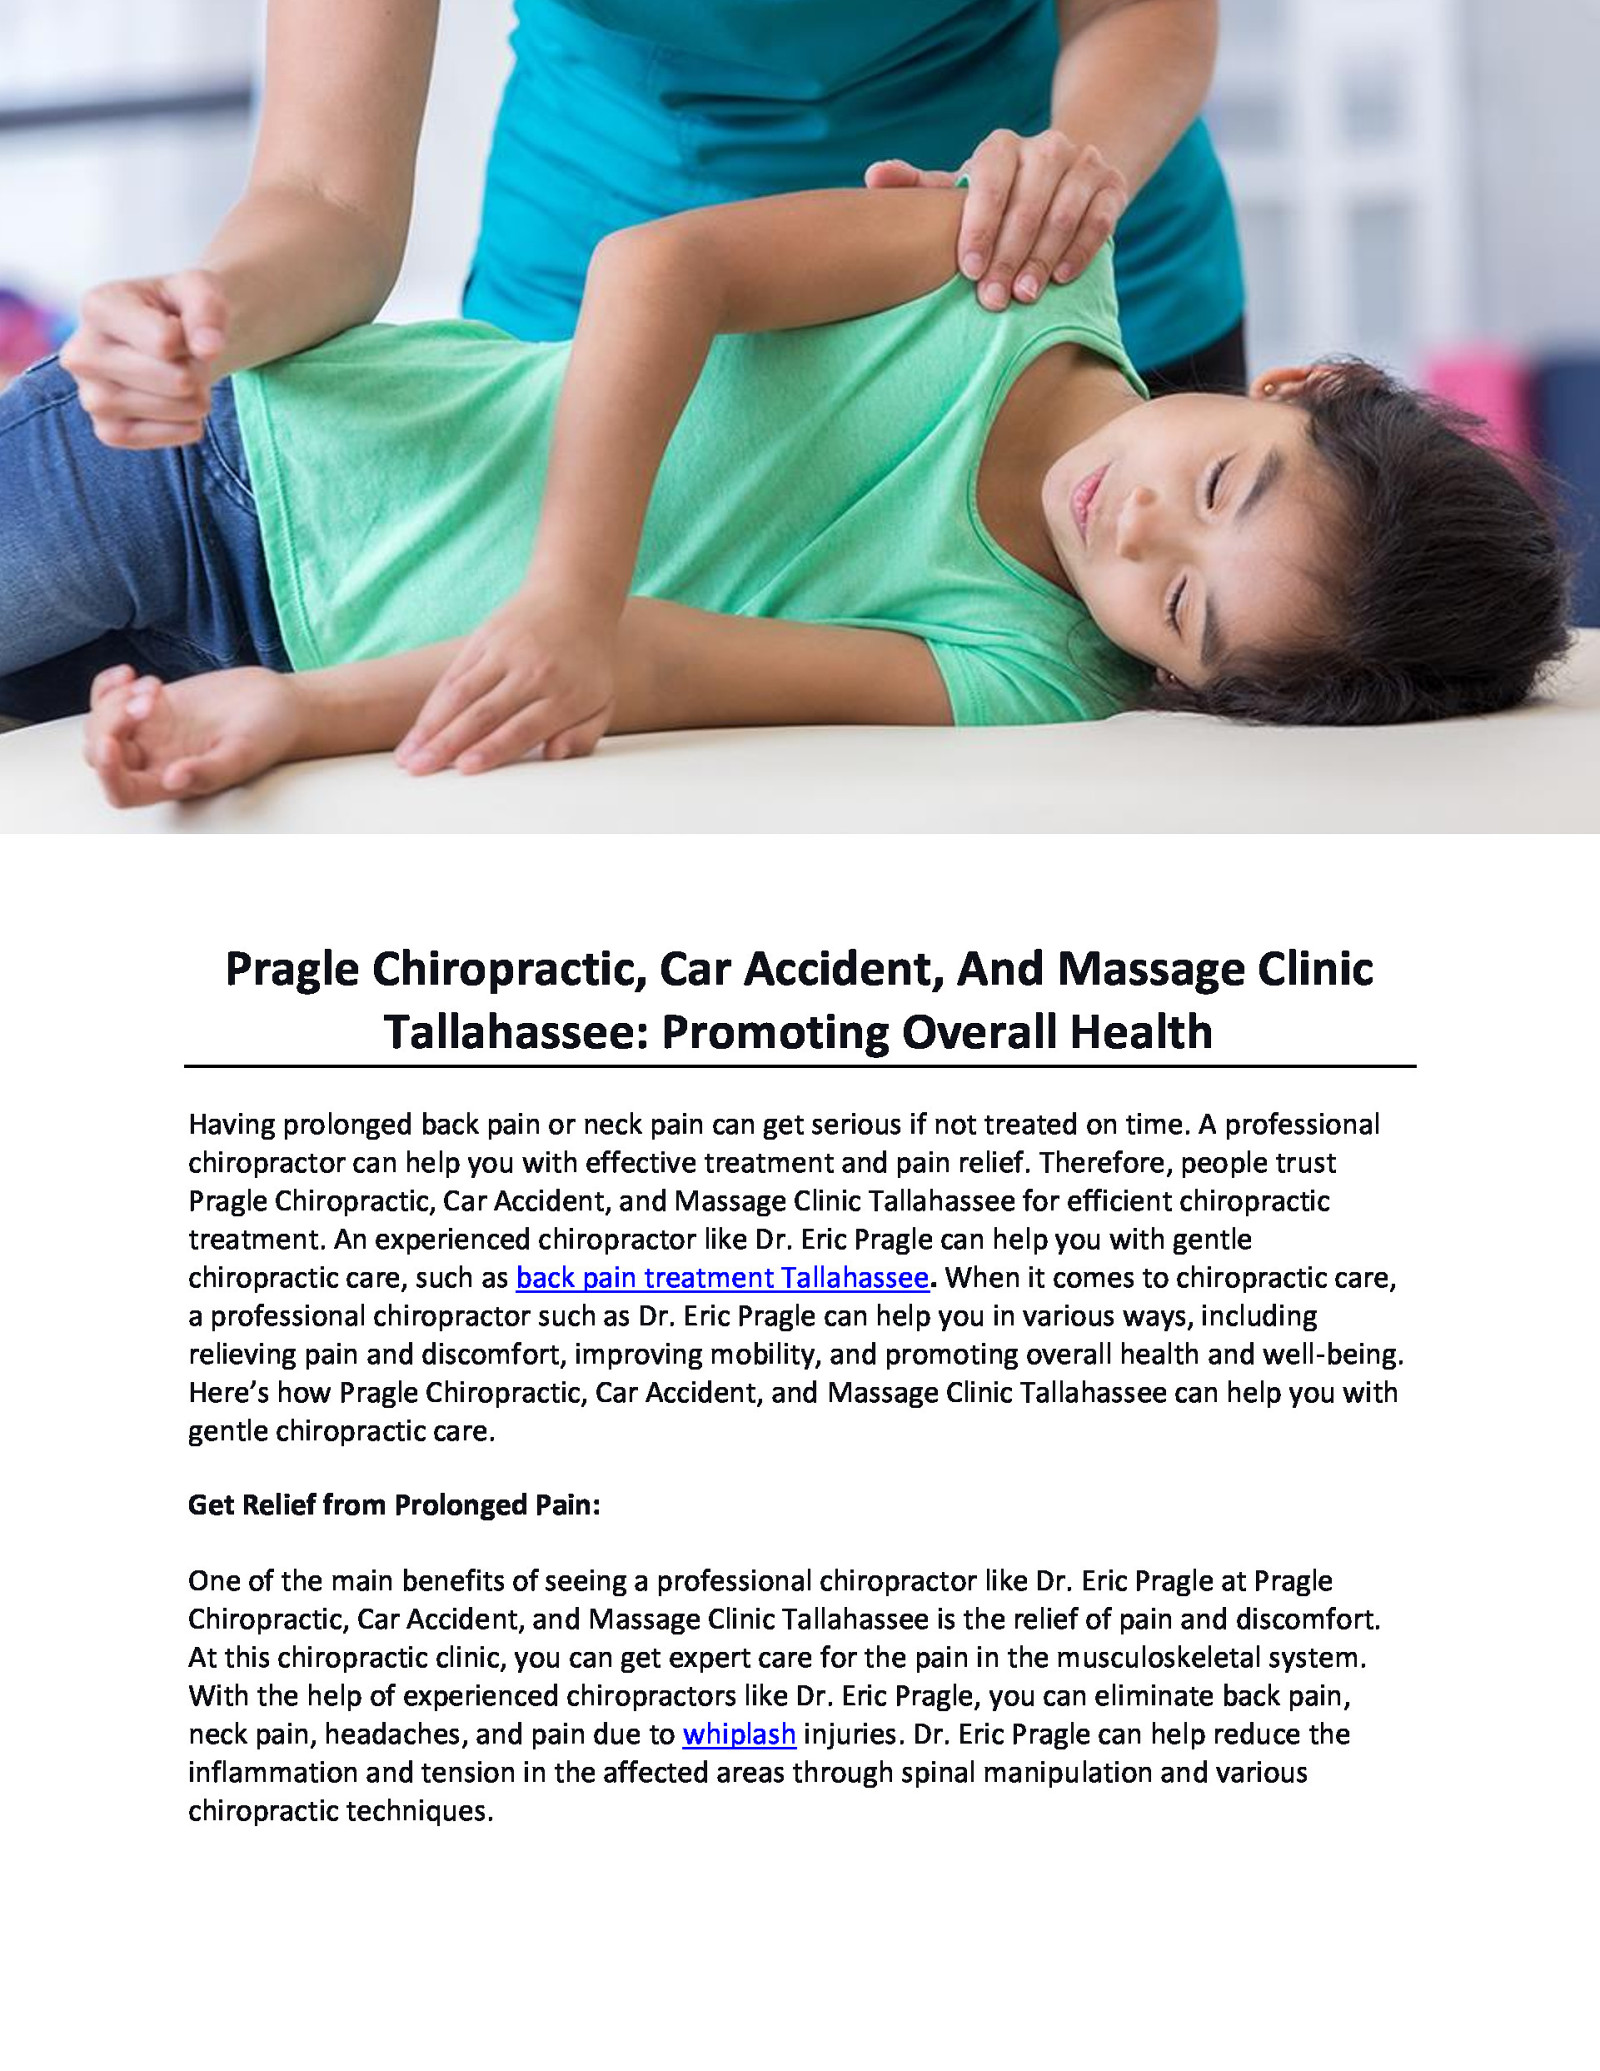 Pragle Chiropractic, Car Accident, And Massage Clinic Tallahassee: Promoting Overall Health